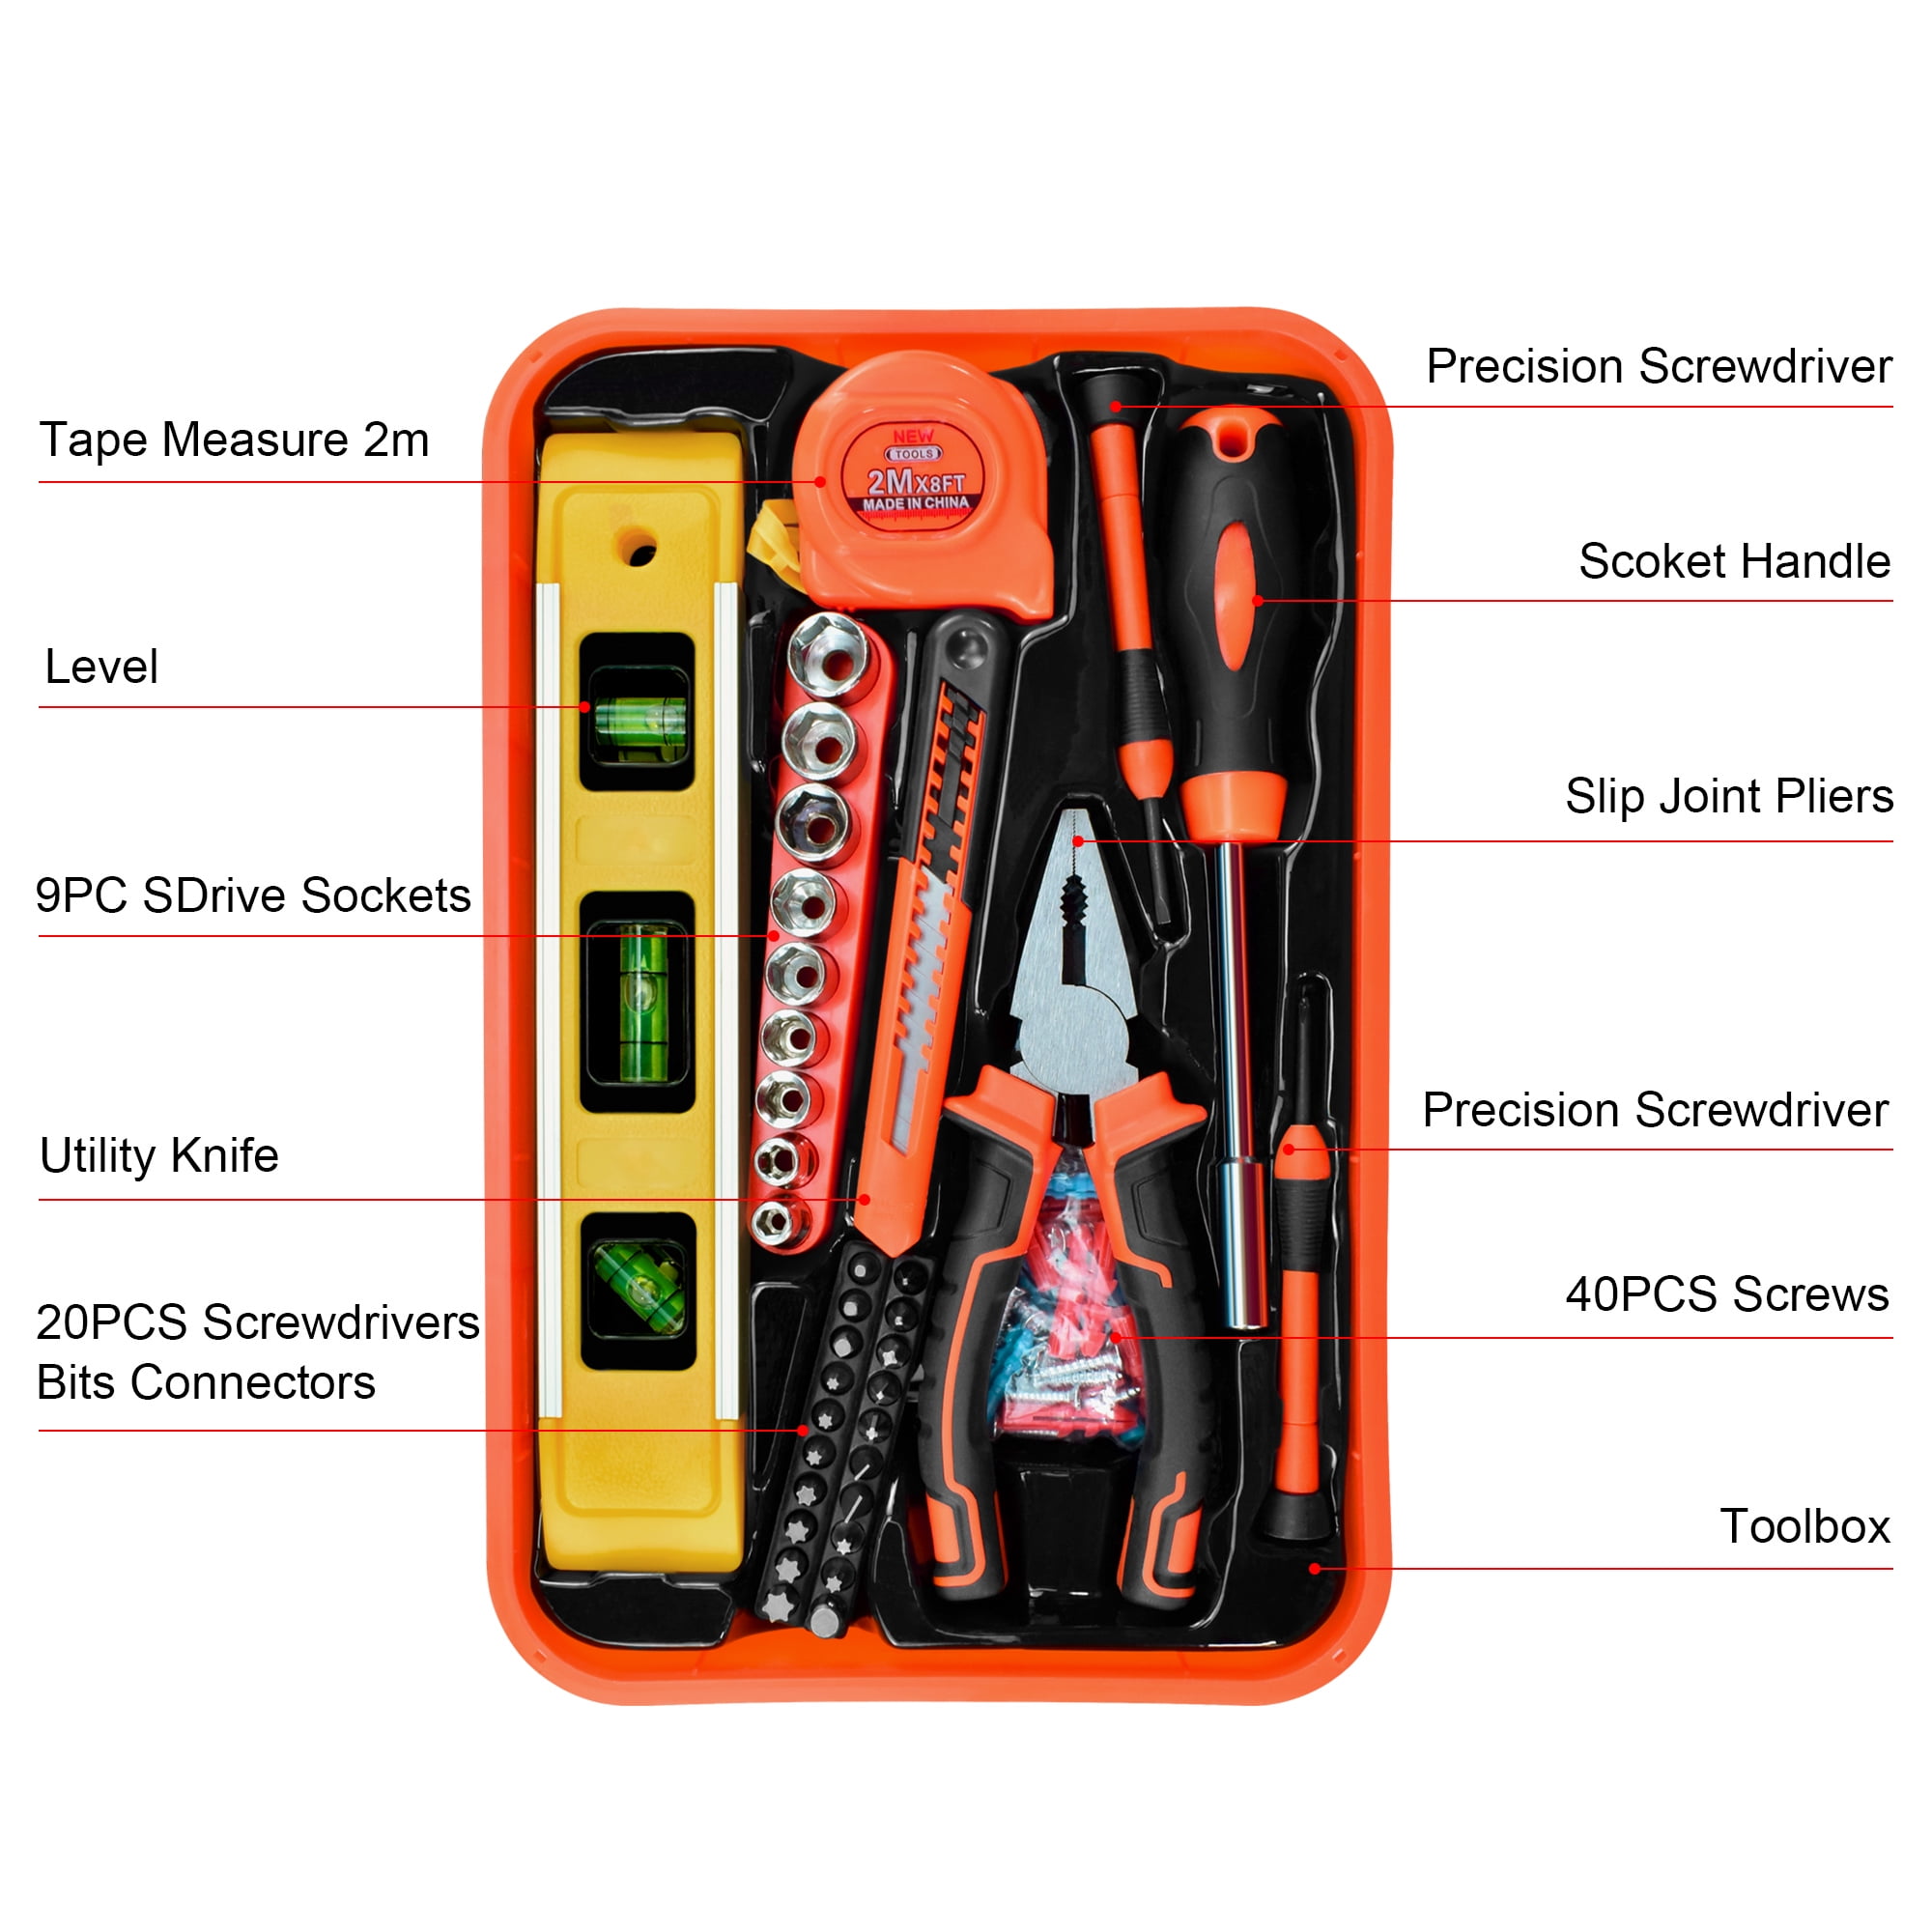 76-Piece SAE and Metric Homeowners Tool Kit with Case